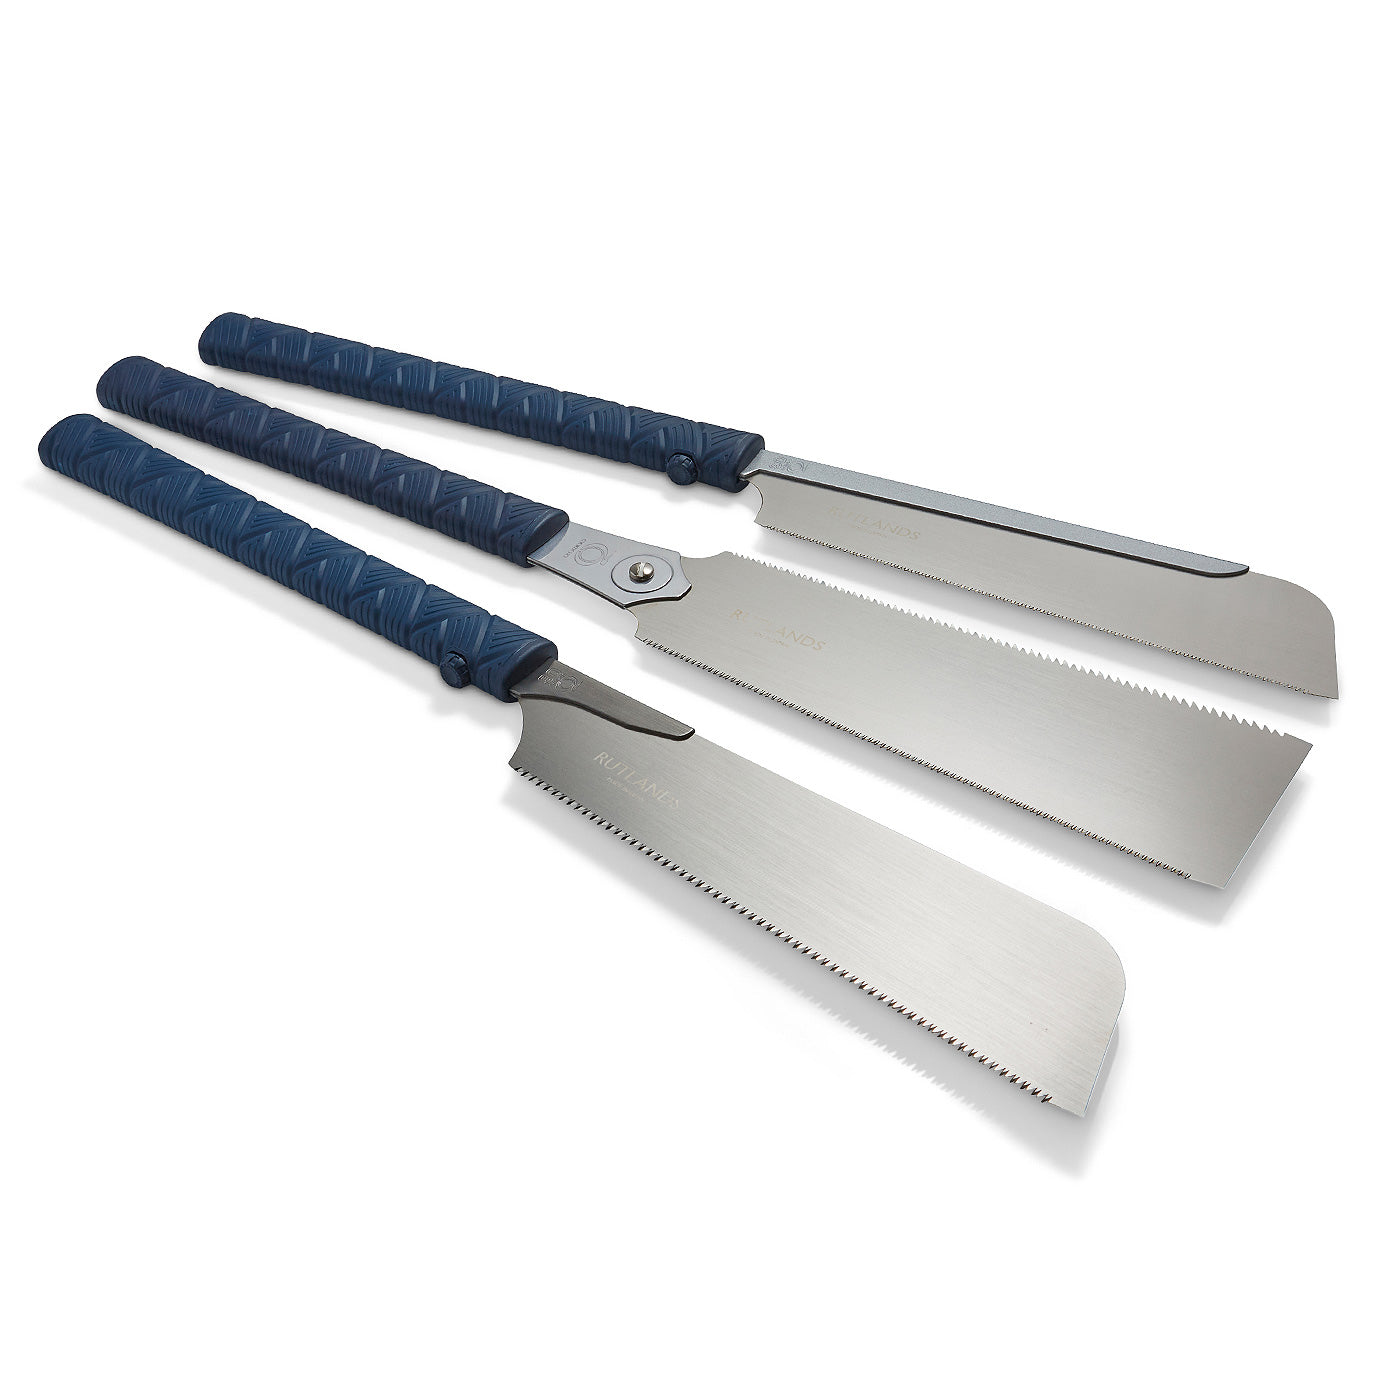 Japanese Saws - 240mm - Power Grip - Set of 3 with Roll